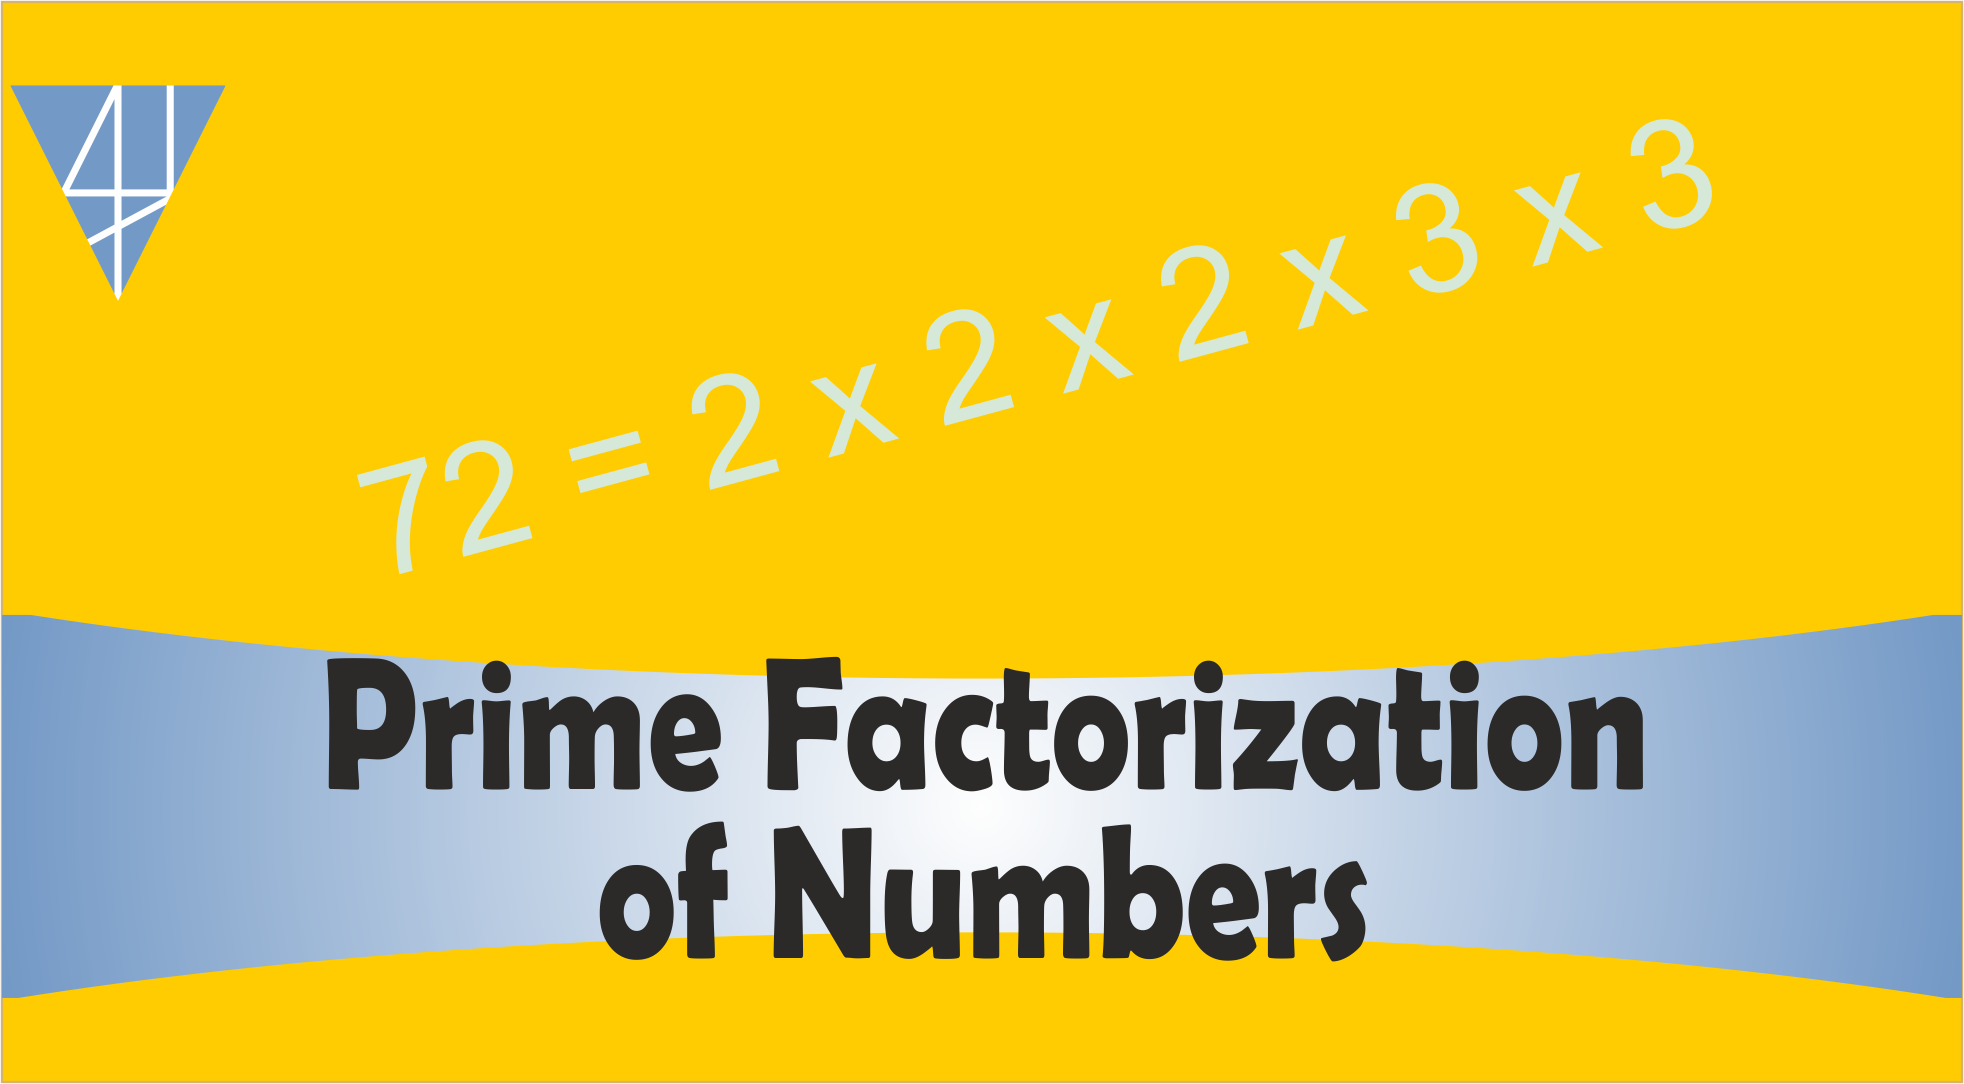 BMS7-Prime Factorization of Numbers